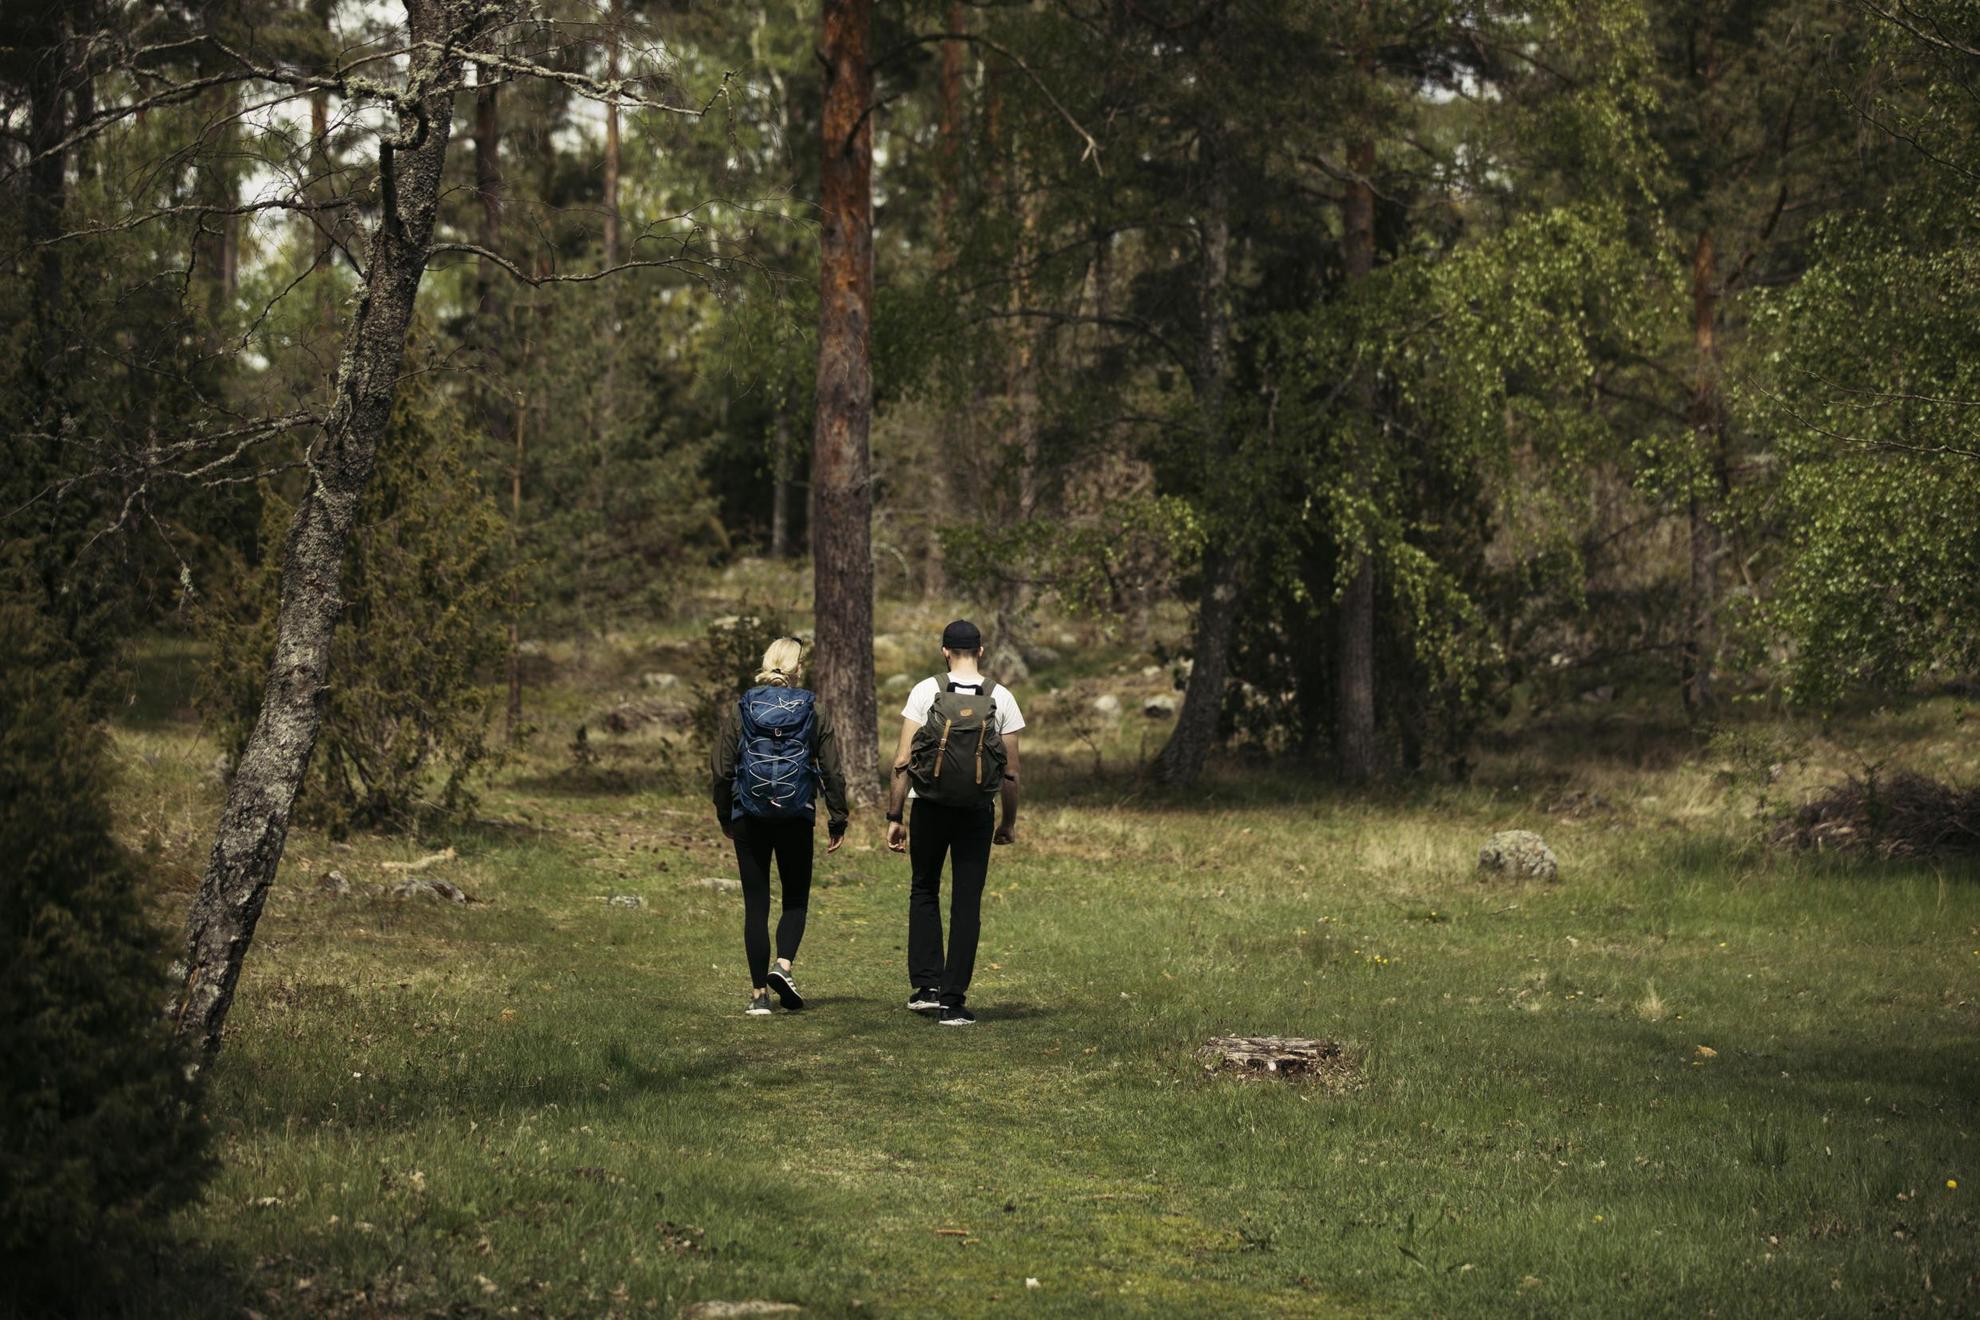 Two people with backpacks are walking in a meadow surrounded by greenery.